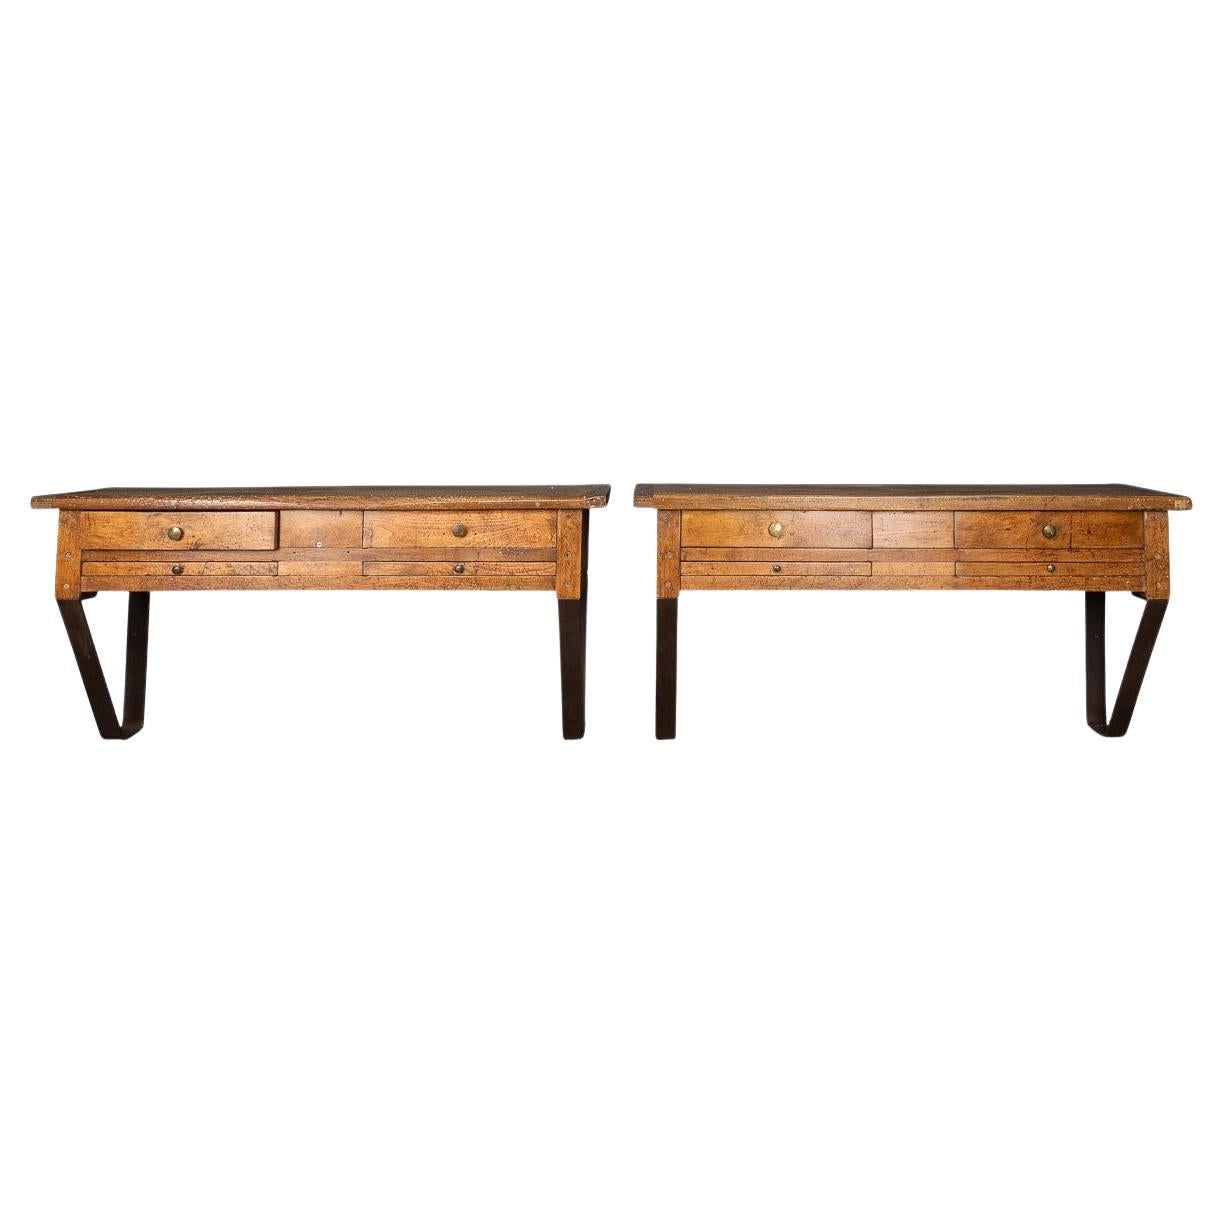 20th Century French Walnut Jewellery Makers Benches, c.1920 For Sale